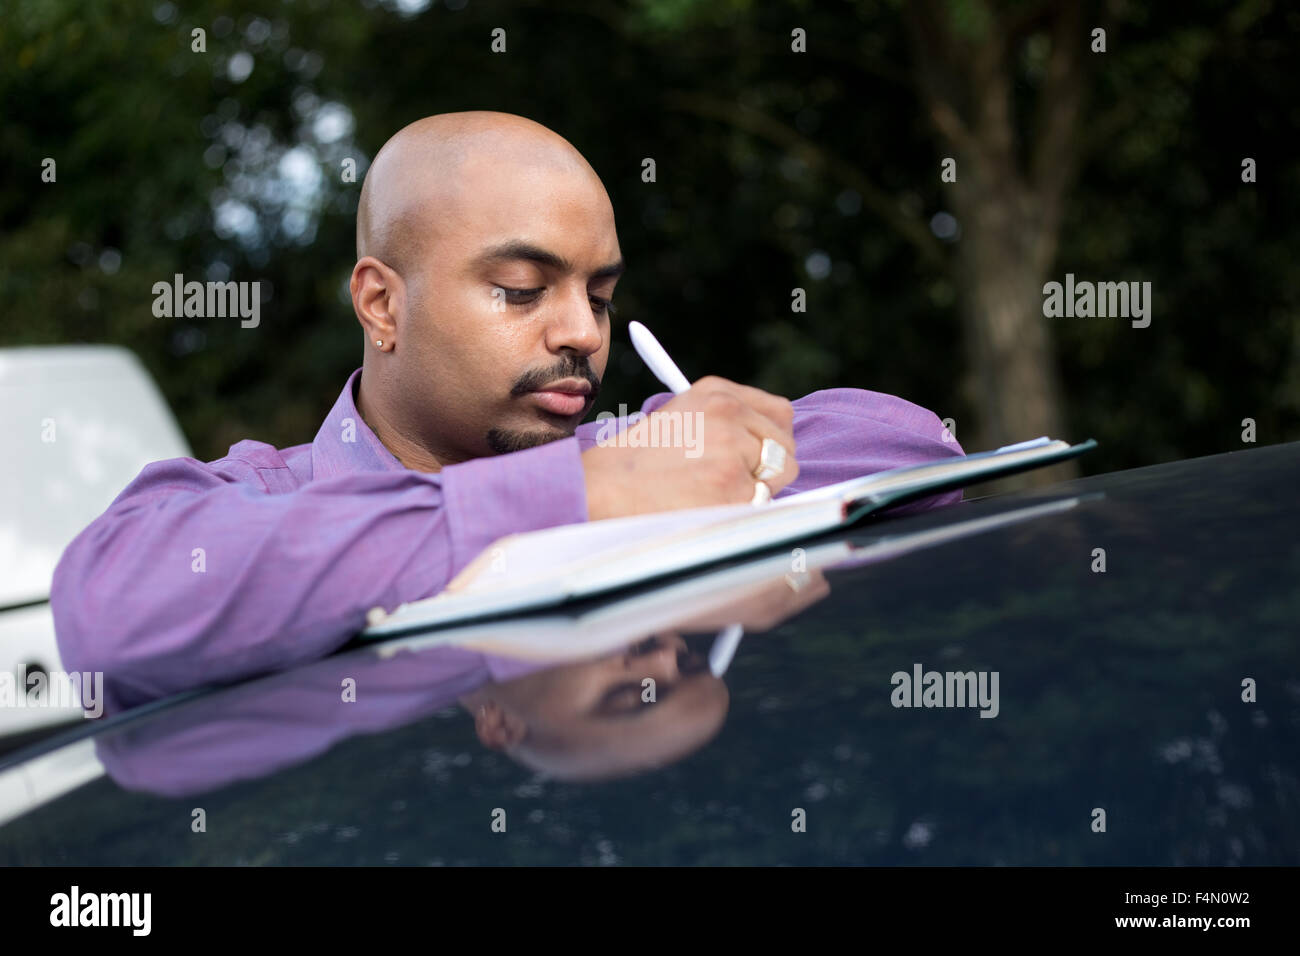 man writing notes leaning on his car roof Stock Photo